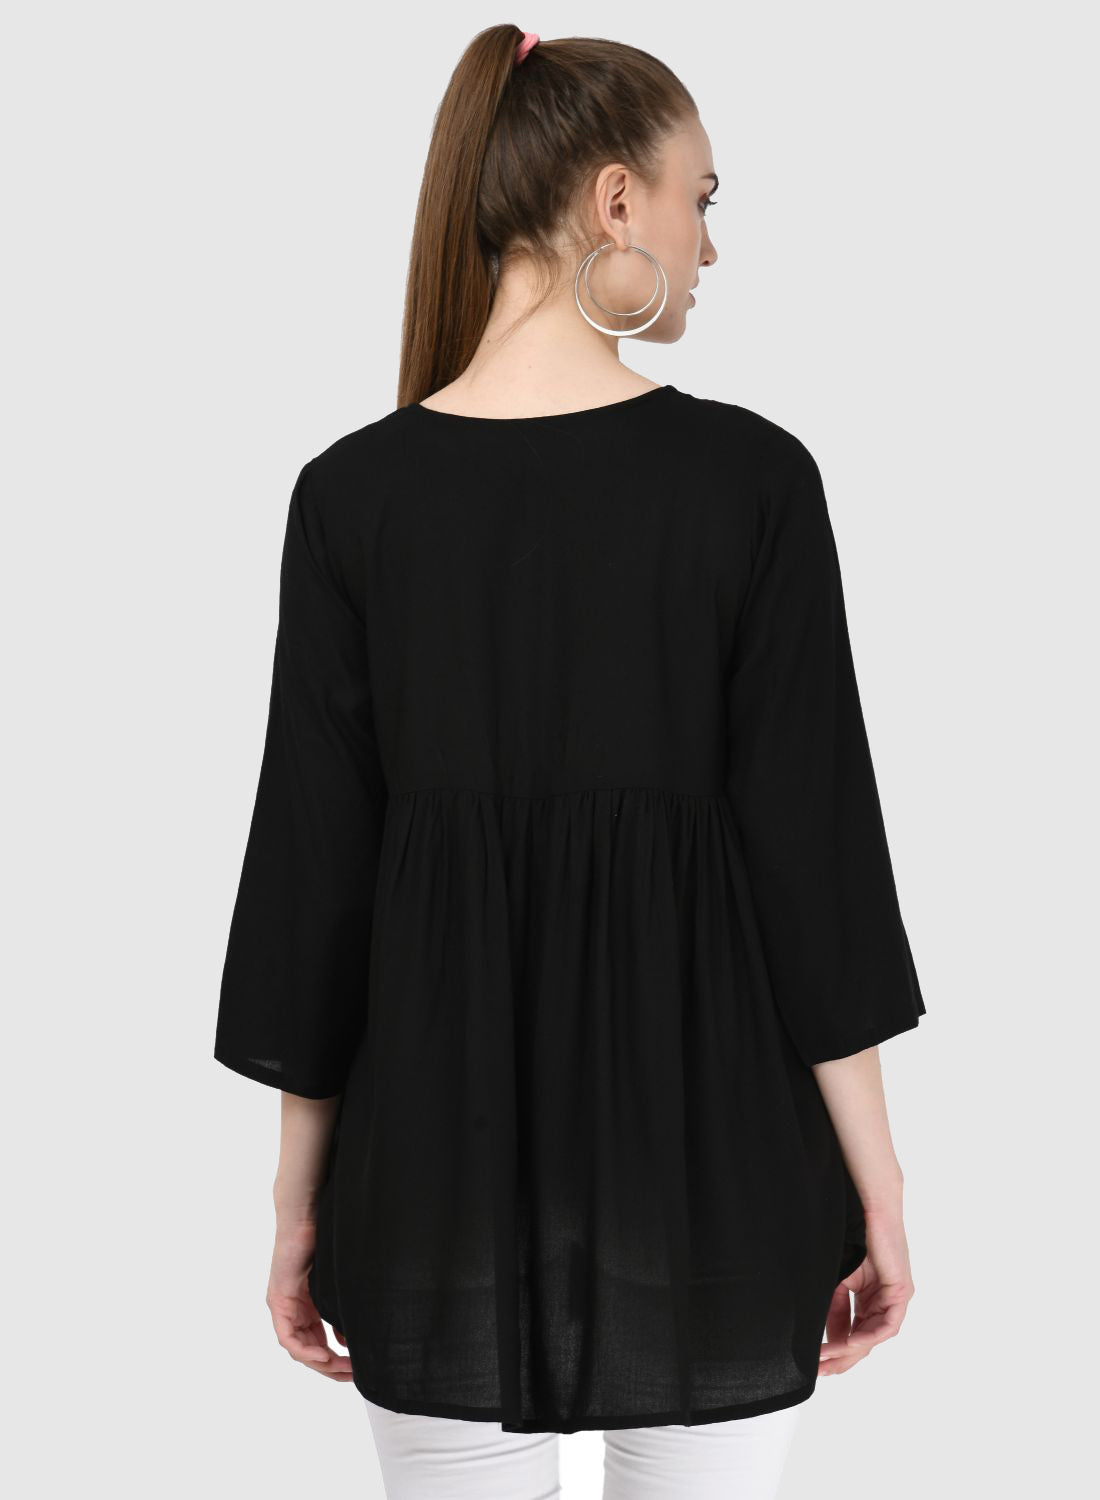 Women Top Black Regular Fit and Flare 3/4 Sleeve Embroidery Work